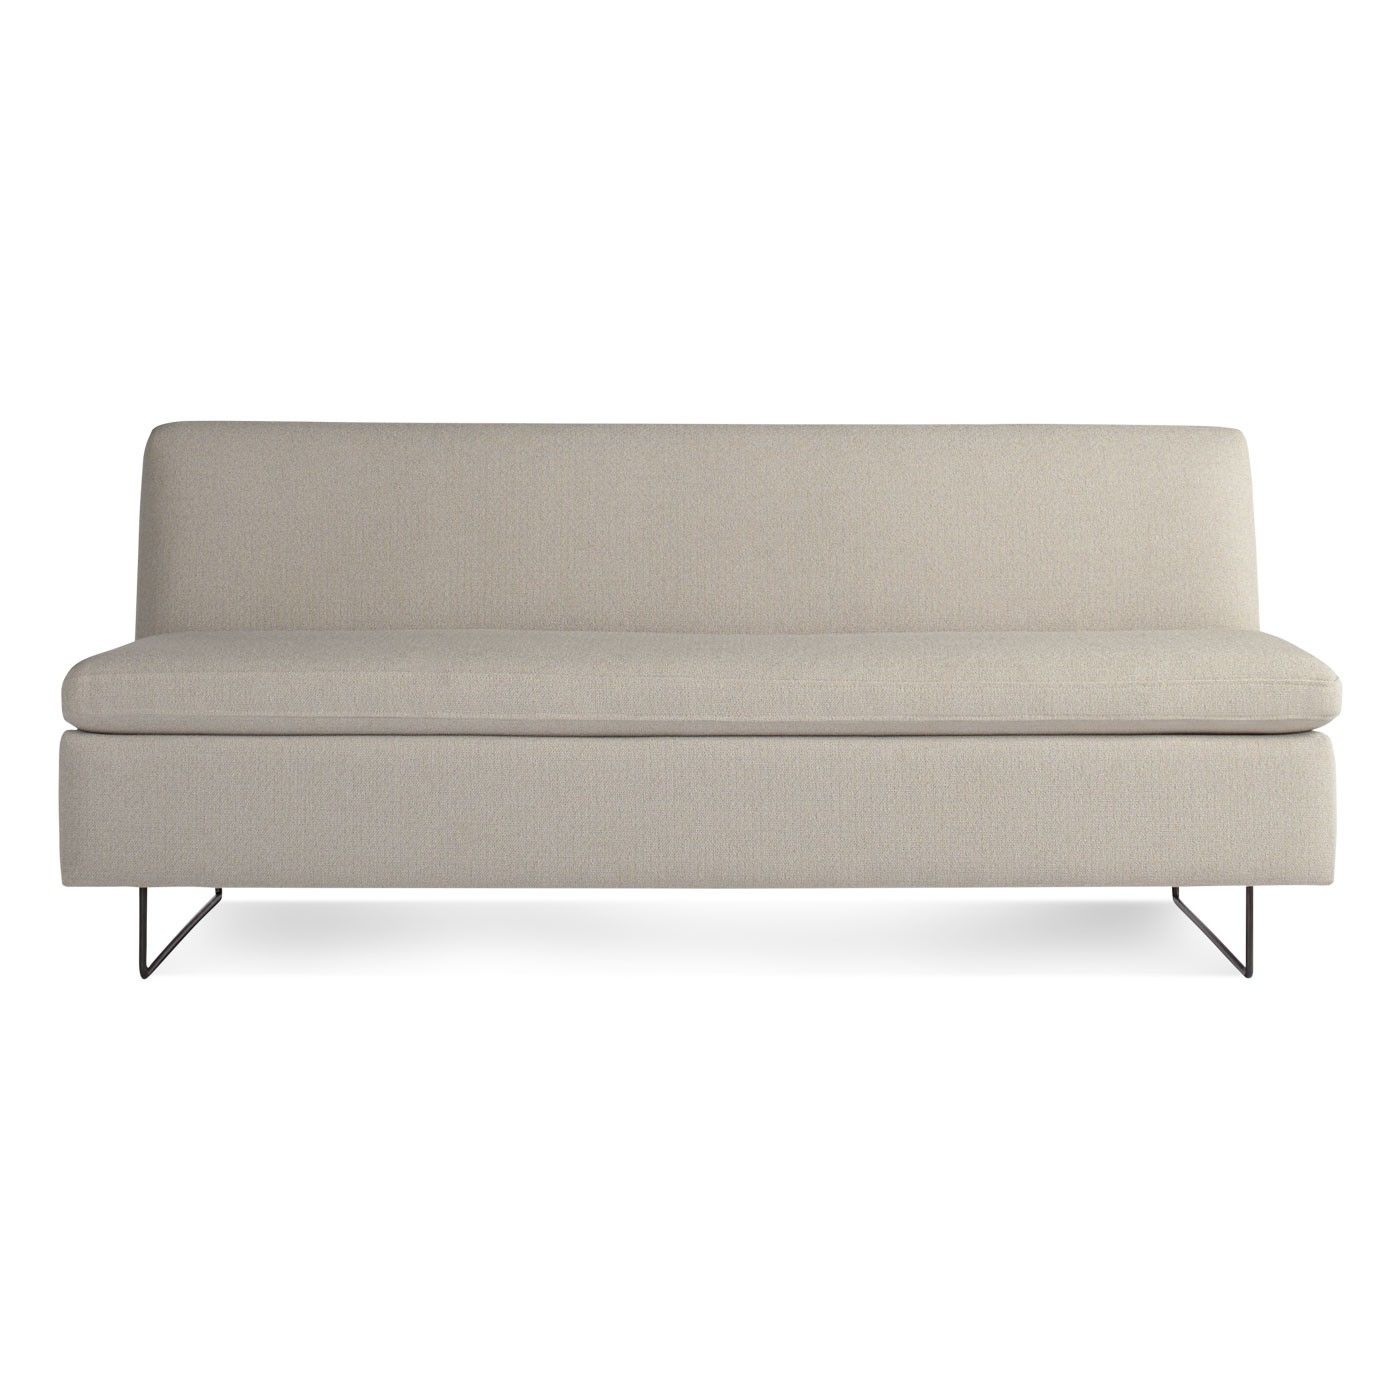 Furniture: Linen Upholstered Armless Sofa For Modern Living Room Design Within Small Armless Sofas (View 7 of 10)